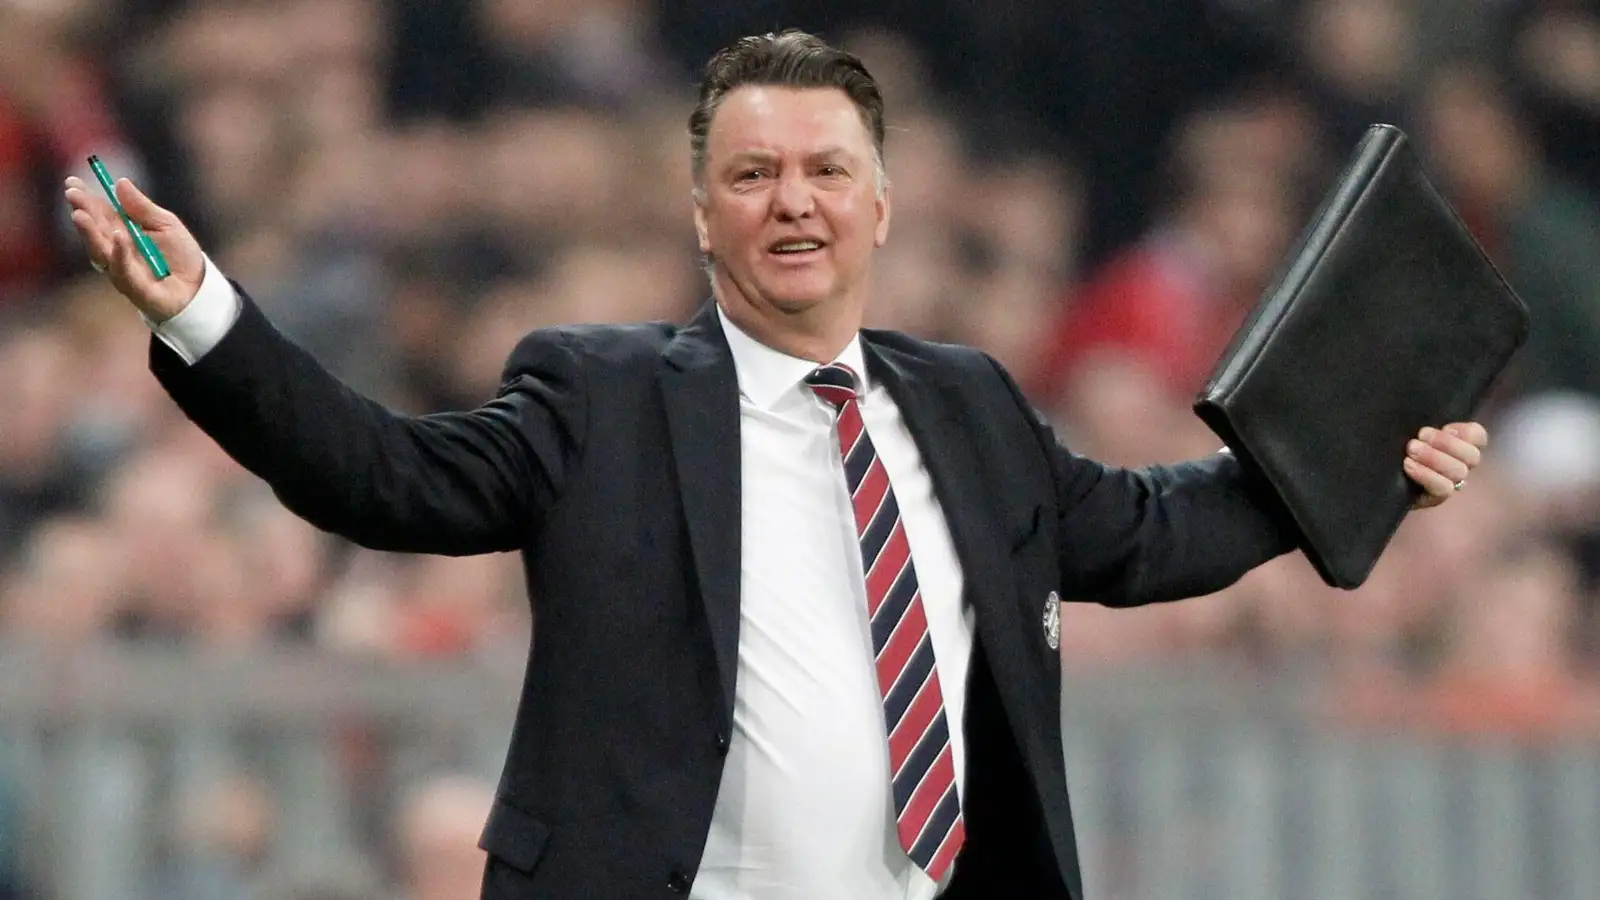 Louis van Gaal dropping his kecks at Bayern is an image we’ll never be able to erase from our minds